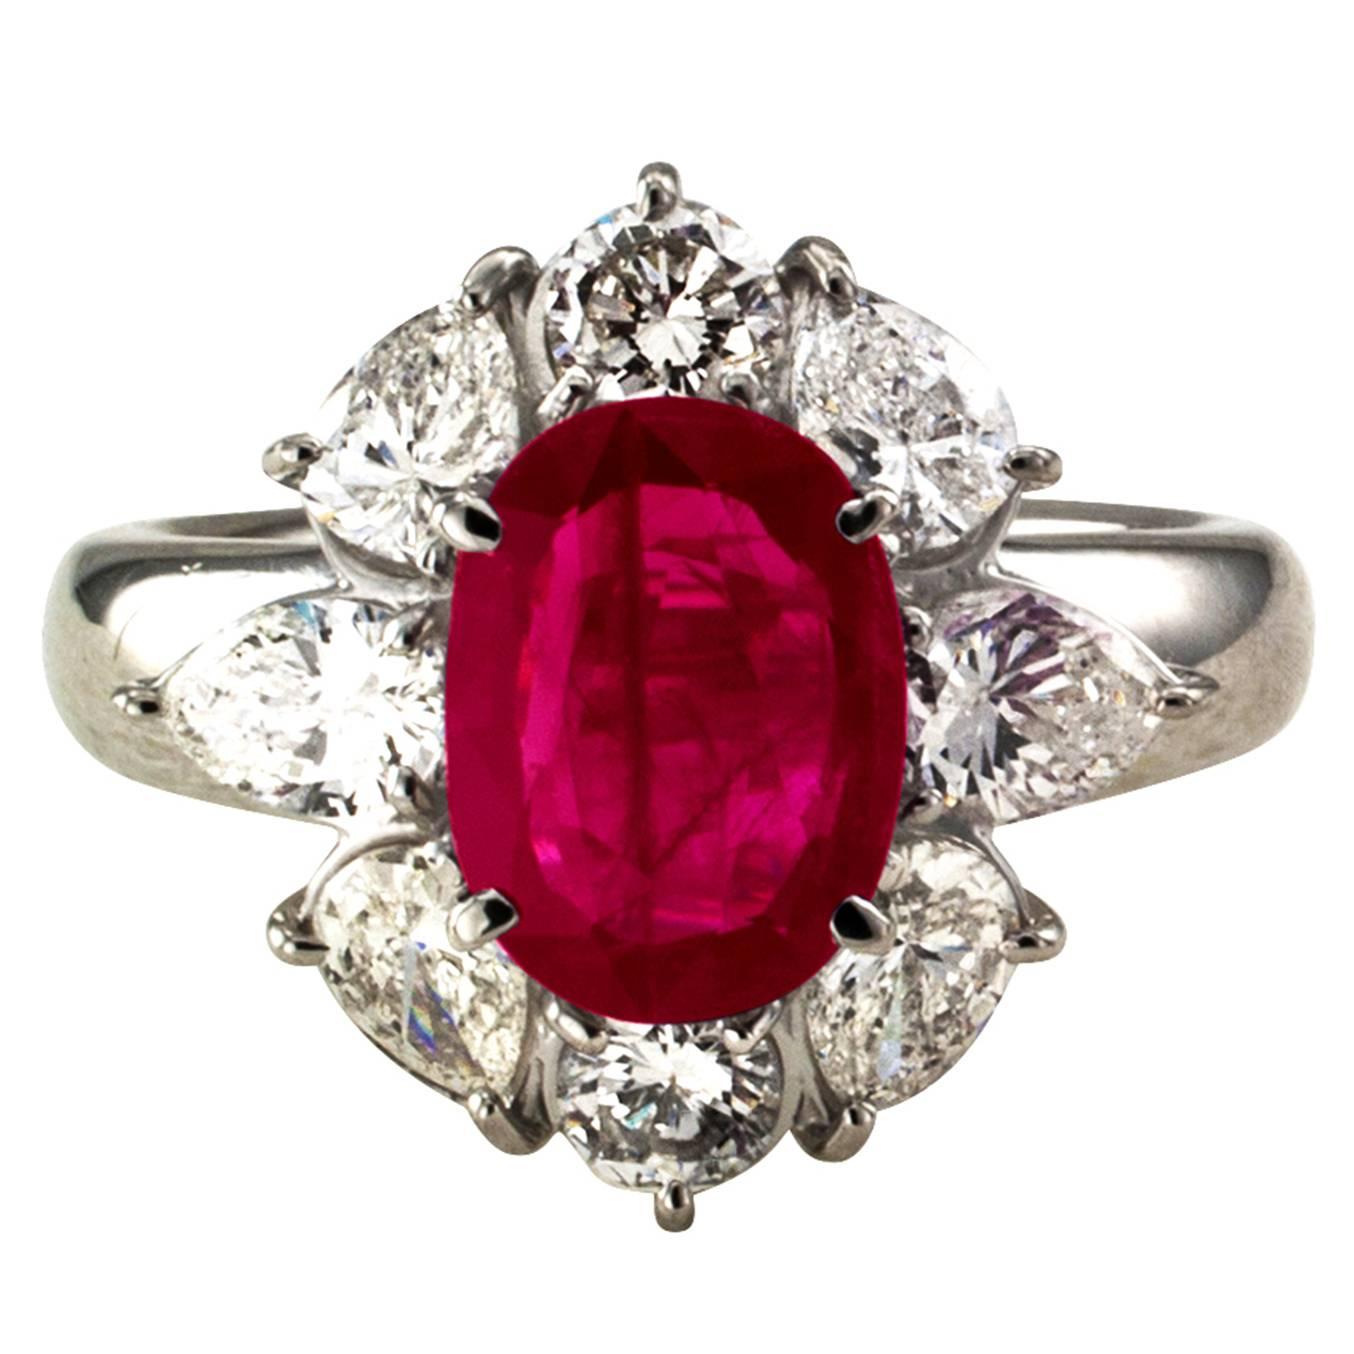 2.23 Carats Burma Ruby and Diamond Platinum Ring

Shimmering and delightful as only a beautiful ruby can be, enthroned in an equally outstanding platinum mount generously accessorized with pear-shaped and round brilliant-cut diamonds totaling